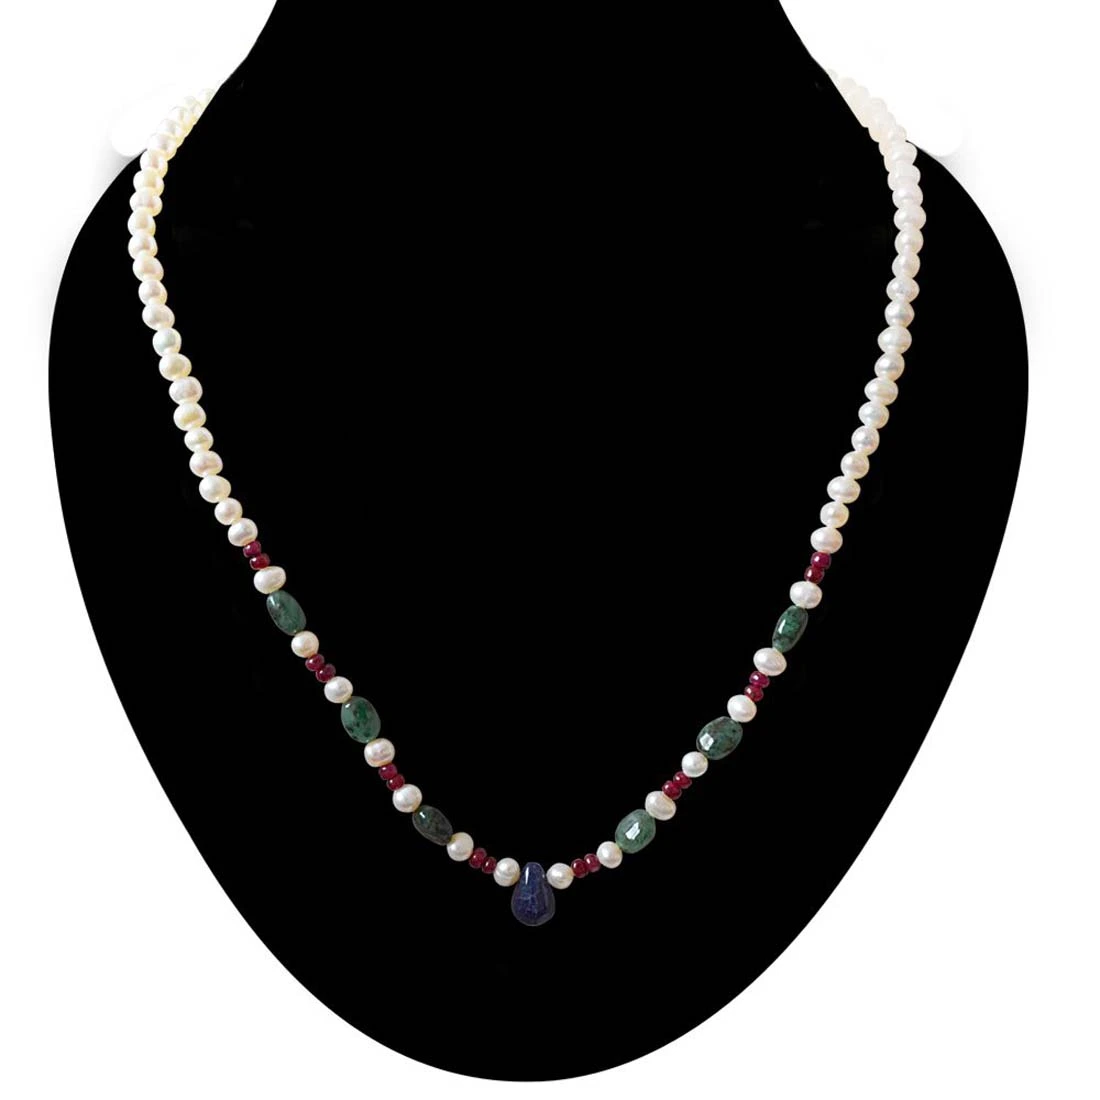 Green Goddess of Grace - Real Freshwater Pearl, Drop Sapphire, Oval Emerald & Ruby Beads Necklace for Women (SN406)